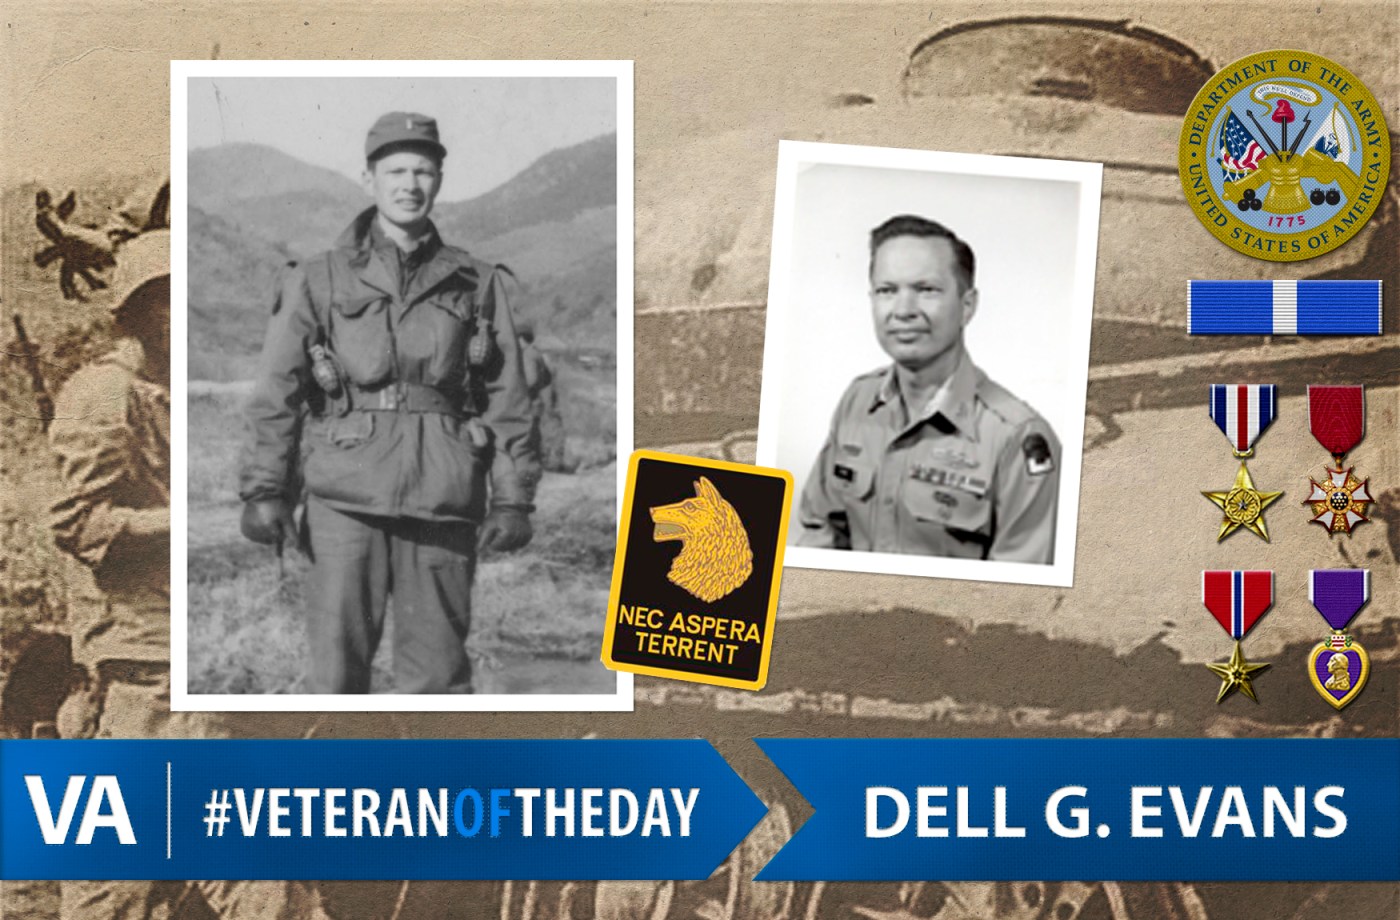 Veteran of the Day Dell G. Evans